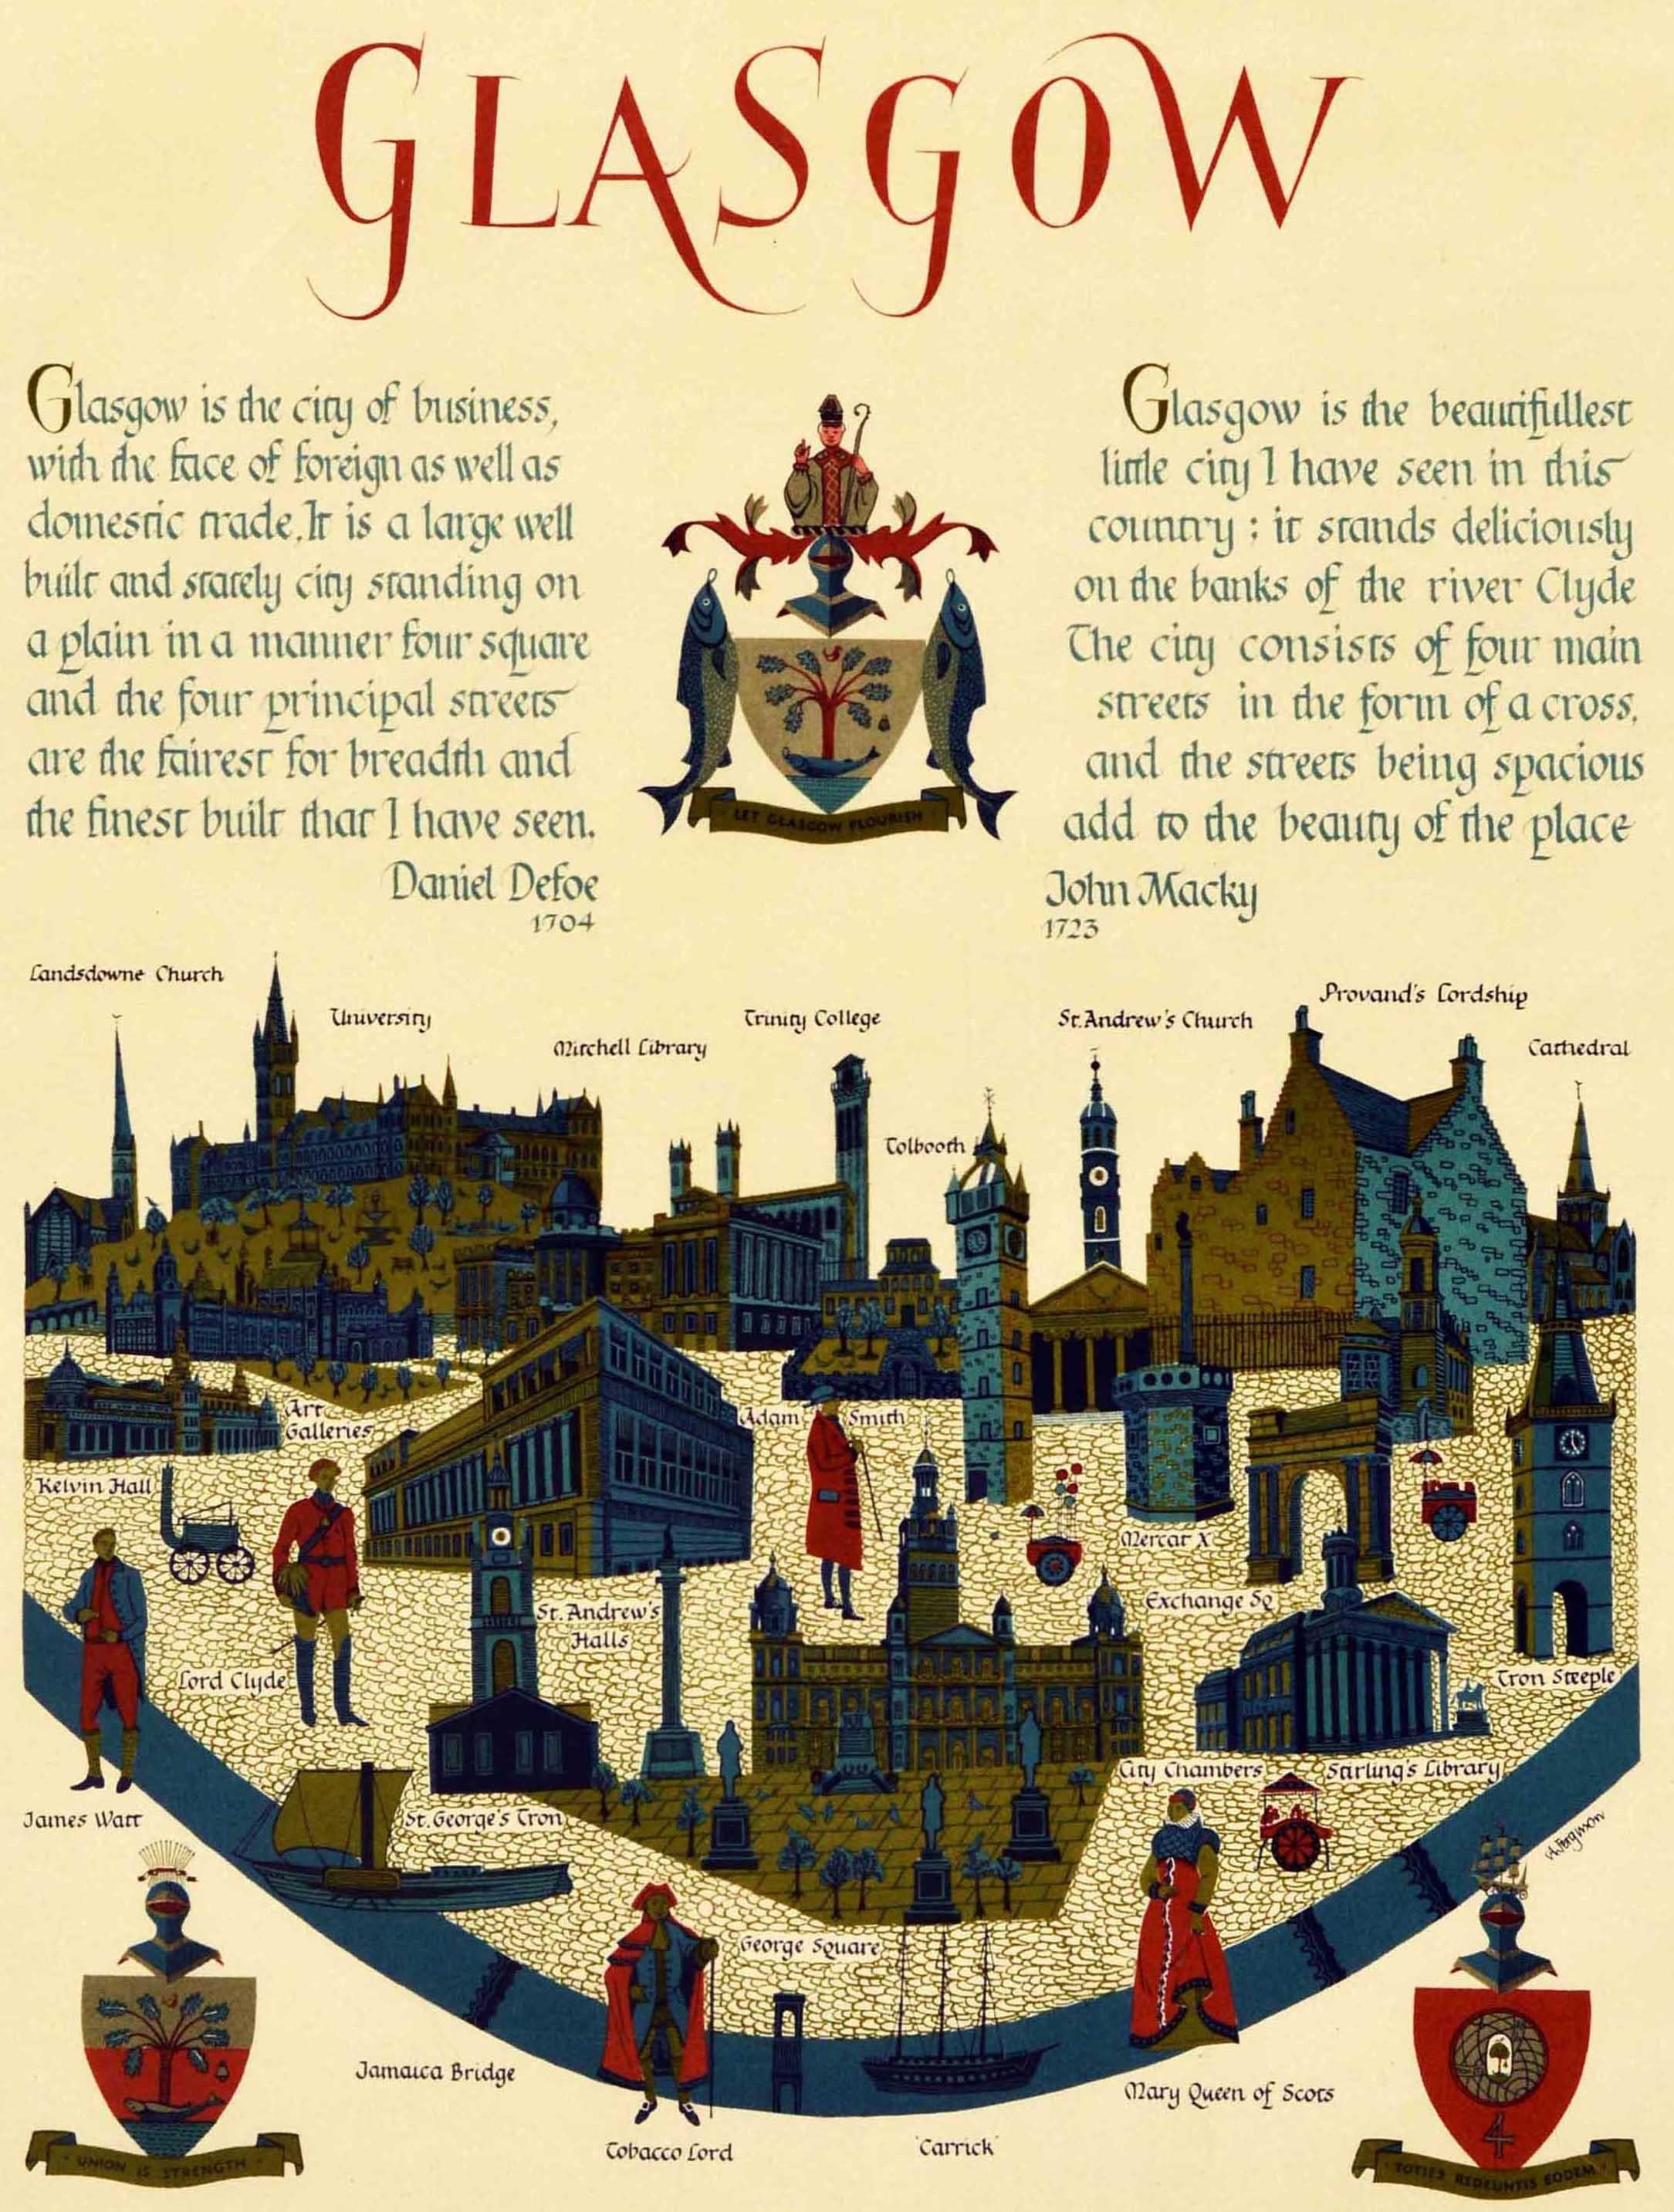 Original vintage travel poster for Glasgow featuring text in calligraphic style lettering with an illustration of the historic city buildings, notable people, river Clyde and coats of arms, the quotes above by Daniel Defoe 1704 - 